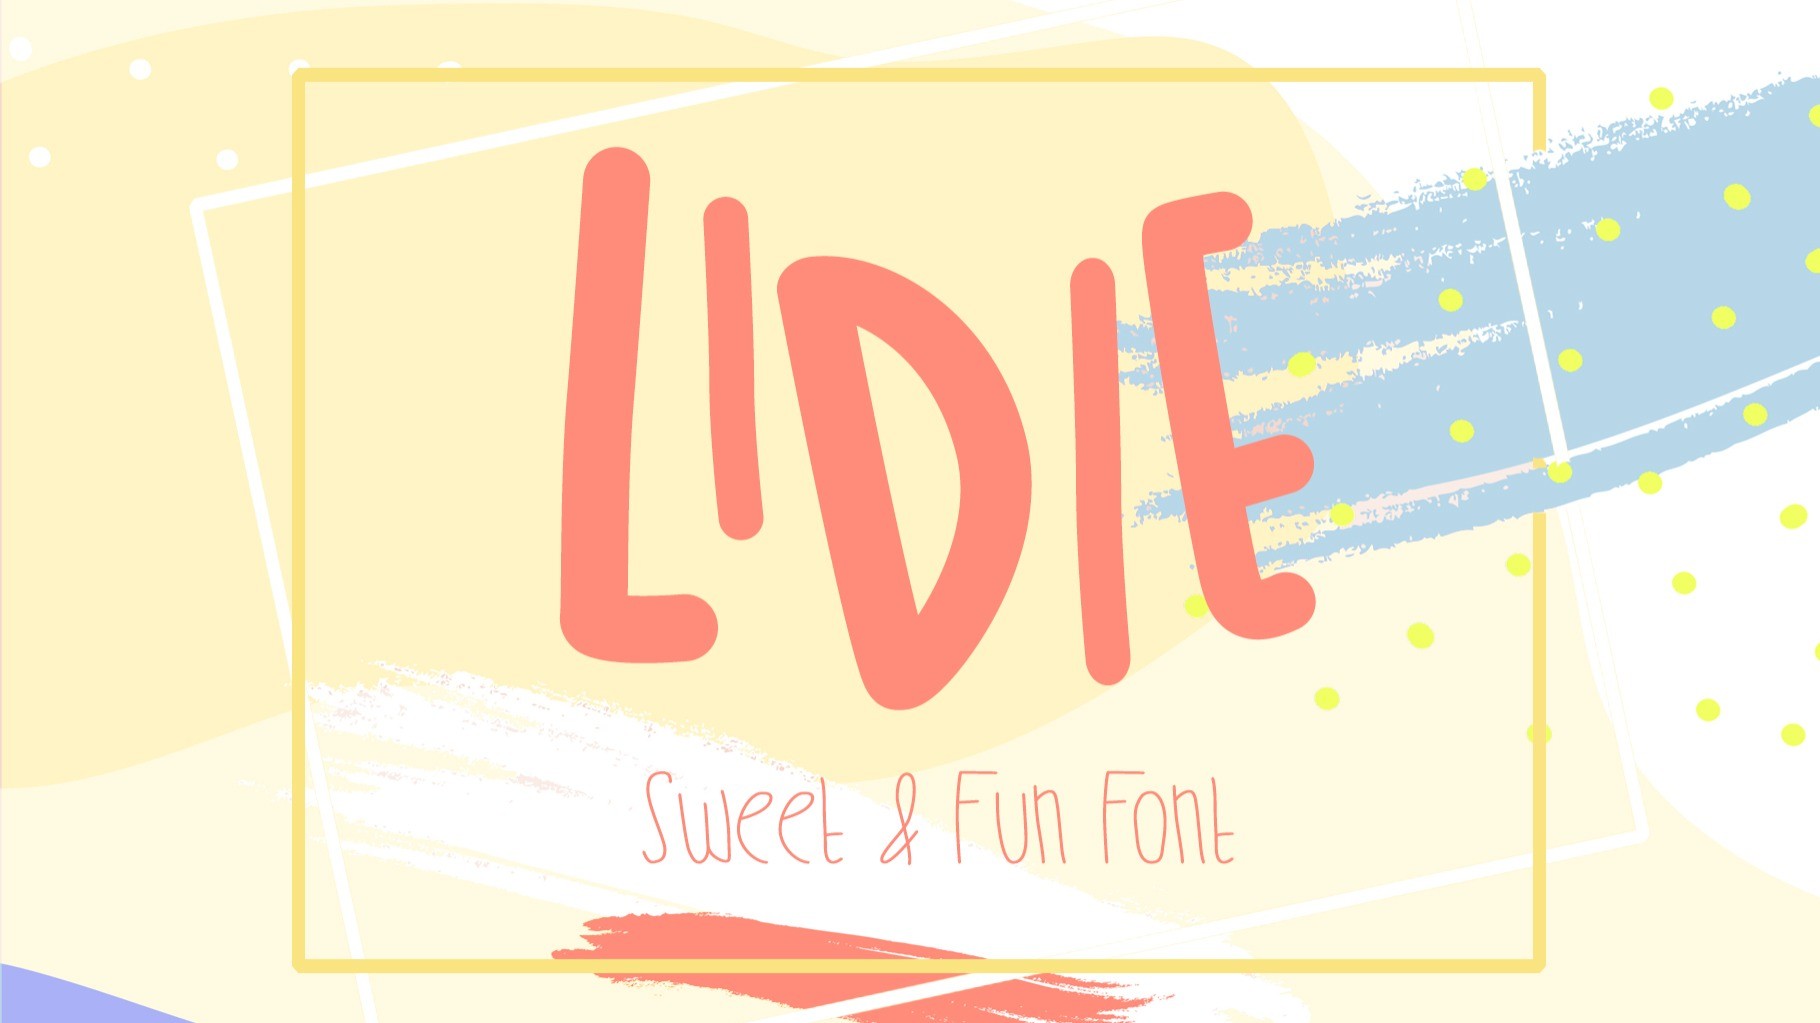 AppSumo Deal for Lidie Font - Sweet and Fun